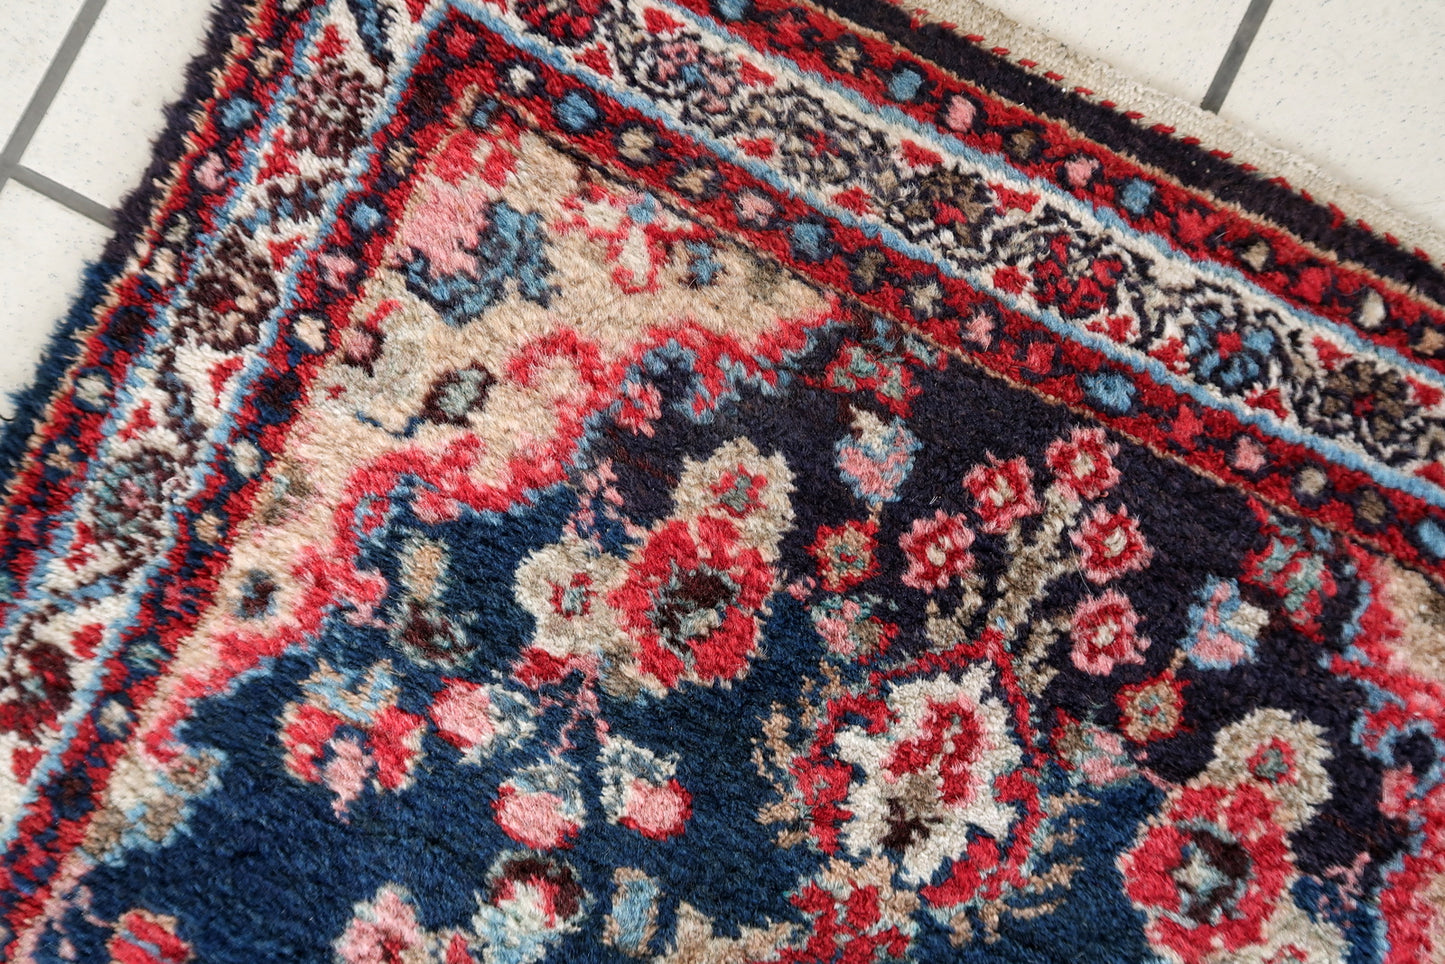 Antique Wool Rug with Traditional Patterns